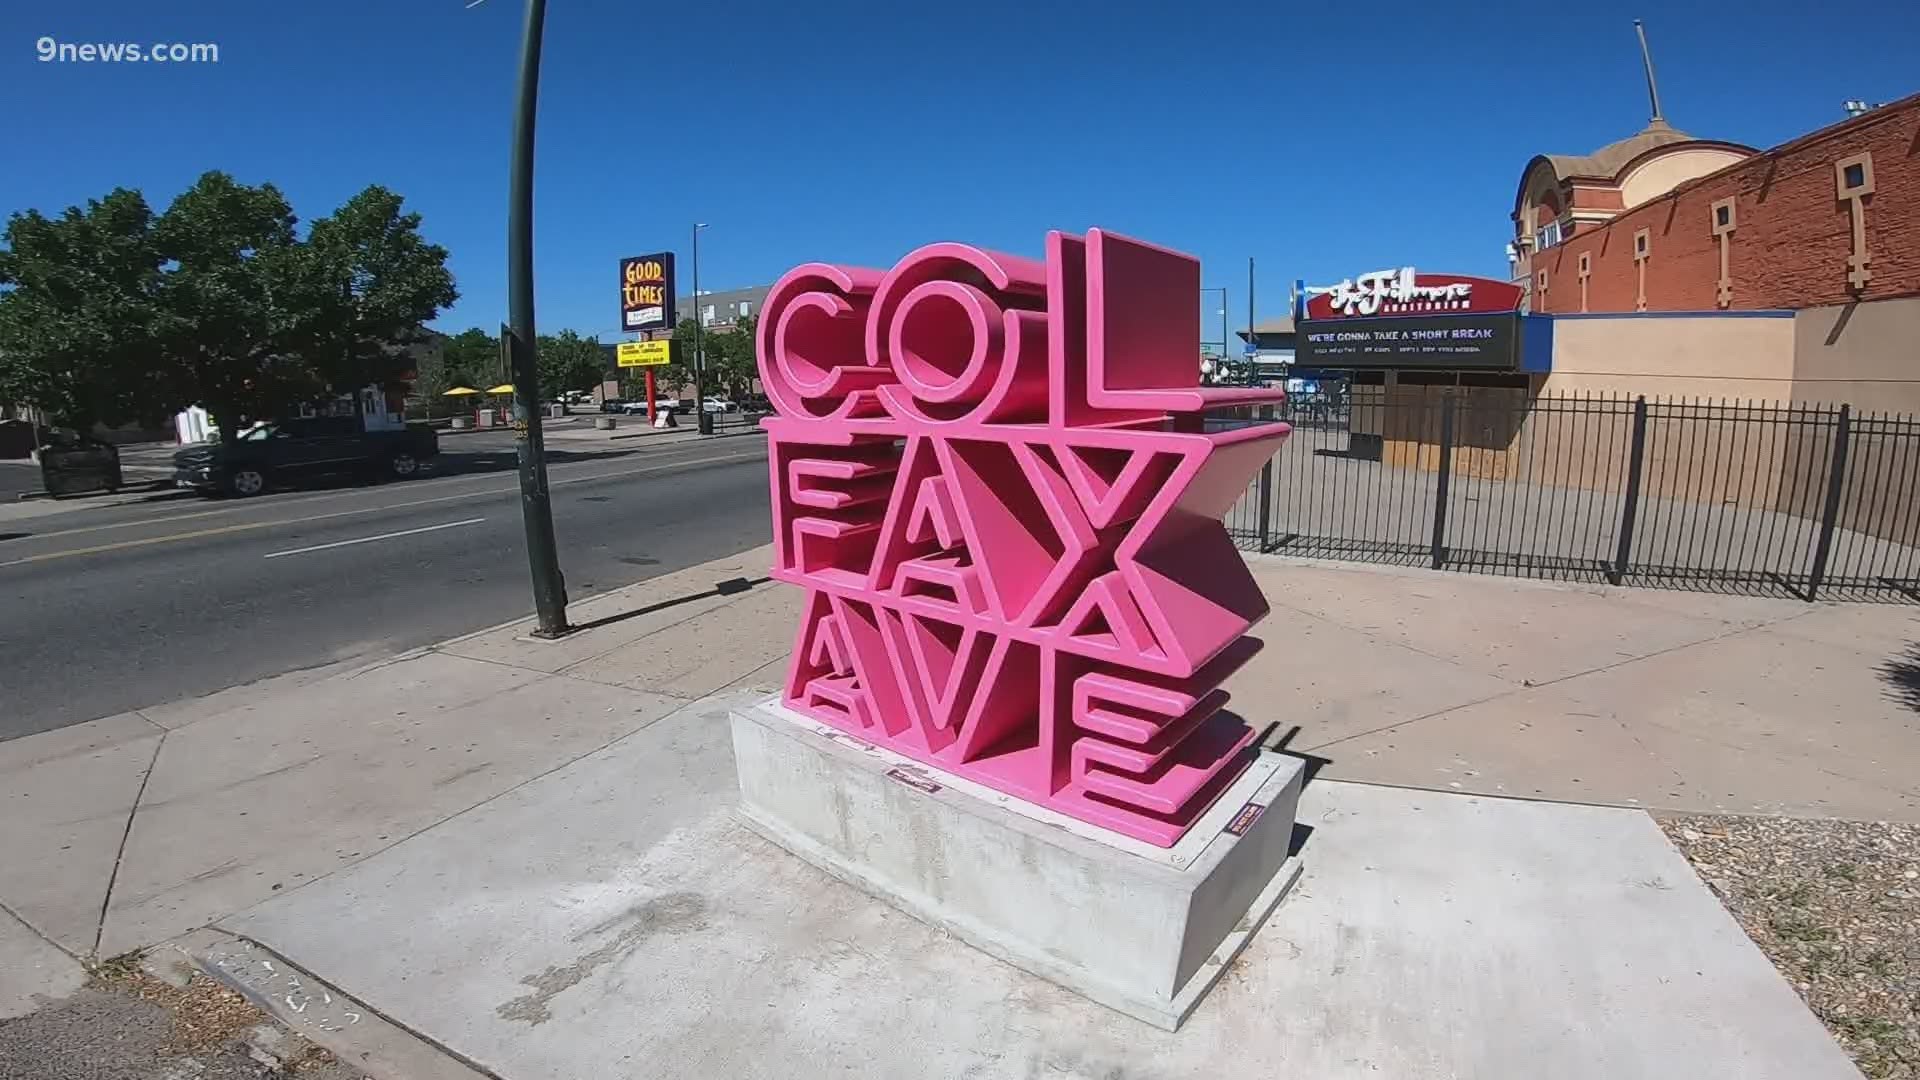 An Elvis Presley impersonator with a passion for Colfax Avenue is sharing it's colorful history.